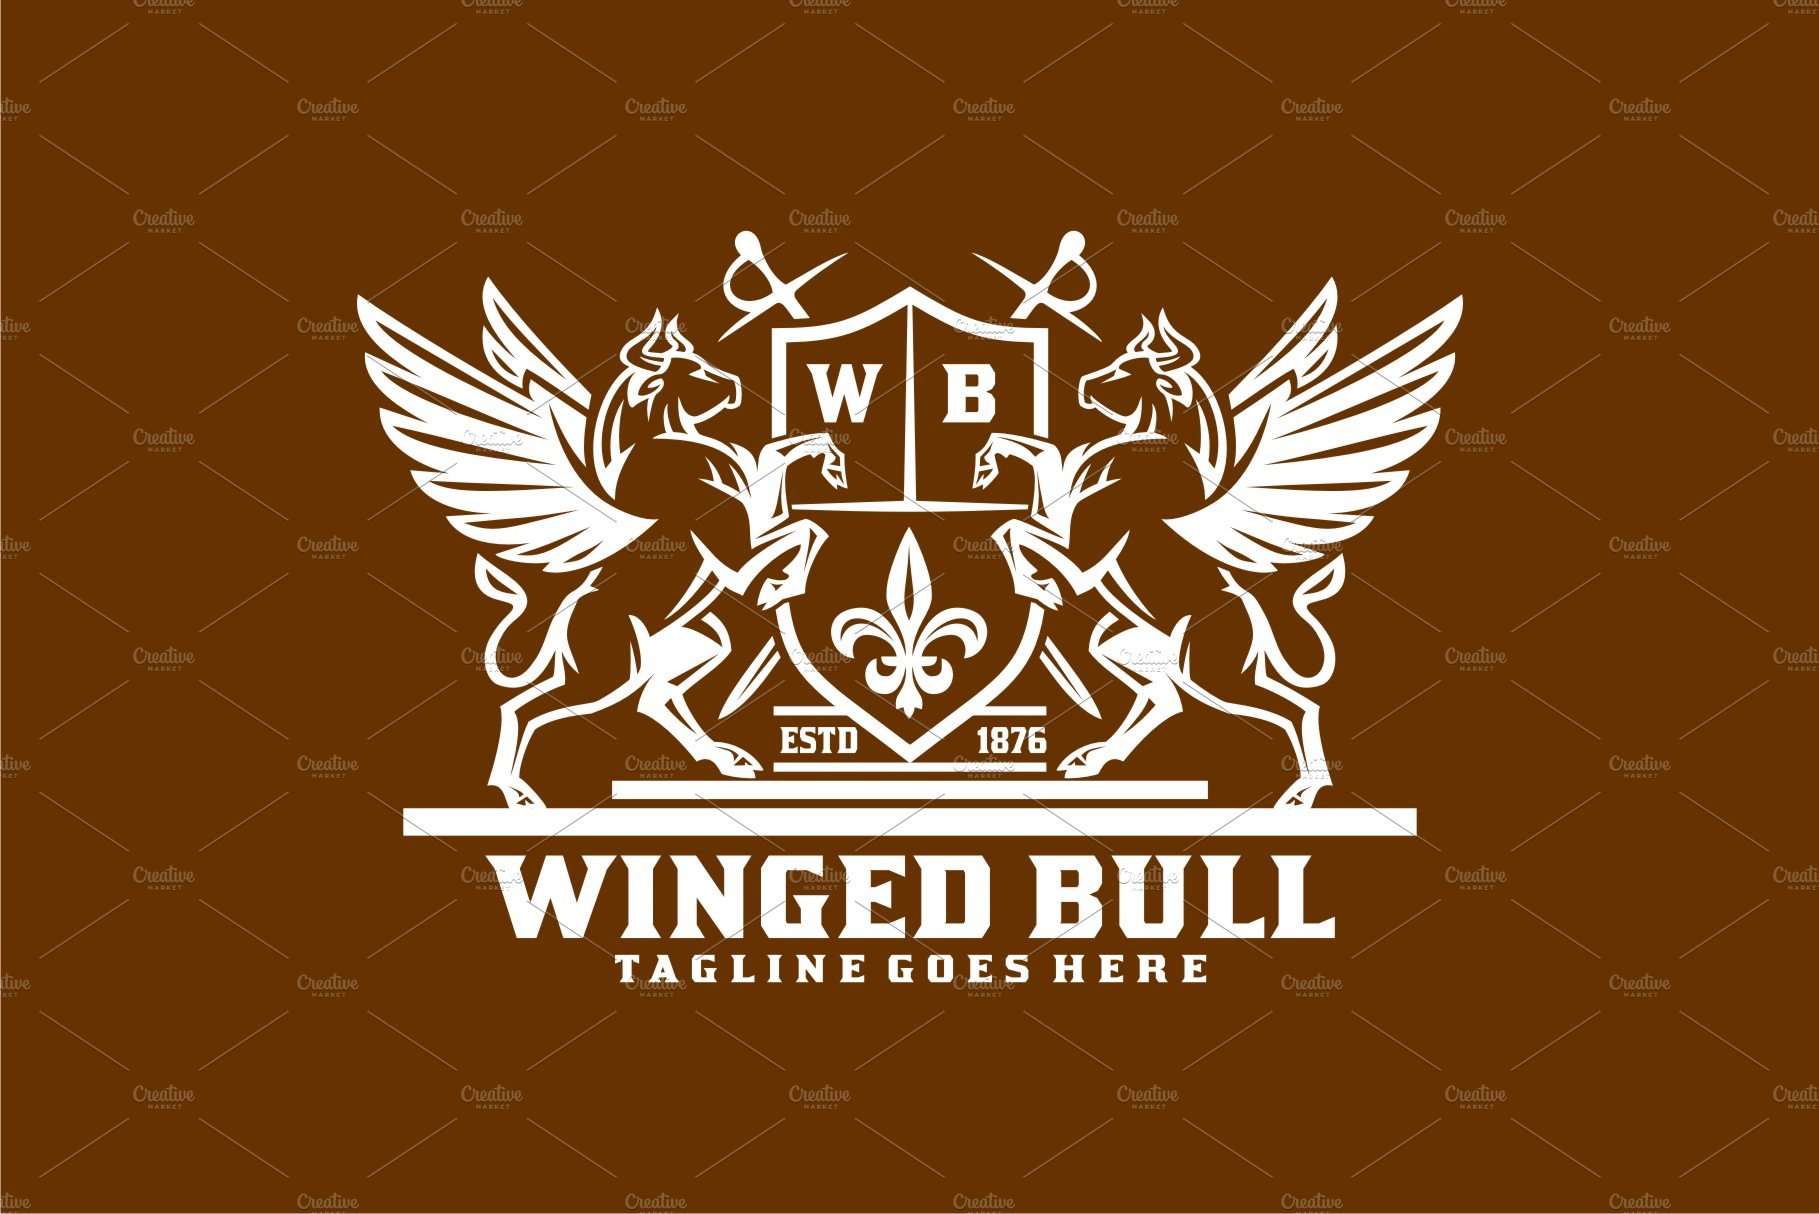 Winged Bull preview image.